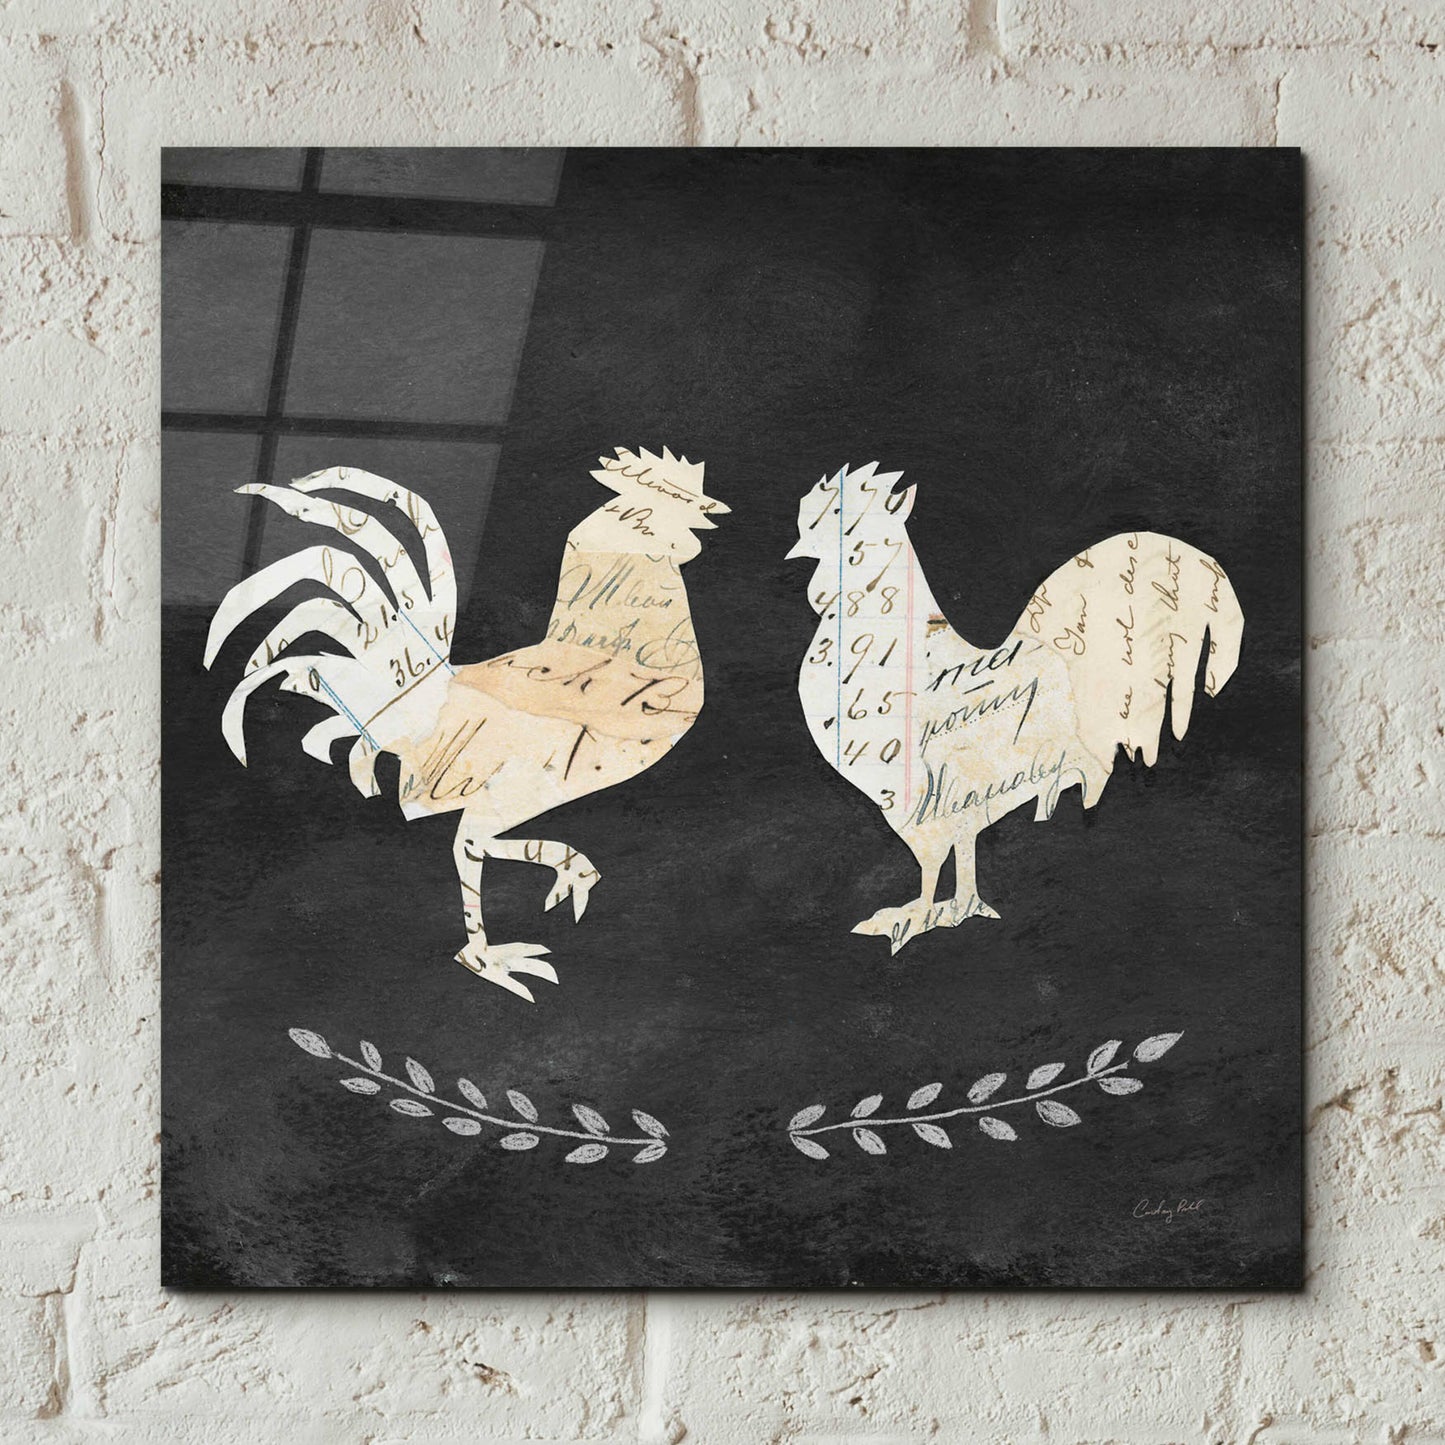 Epic Art 'Le Coq Cameo Sq no Words' by Courtney Prahl, Acrylic Glass Wall Art,12x12